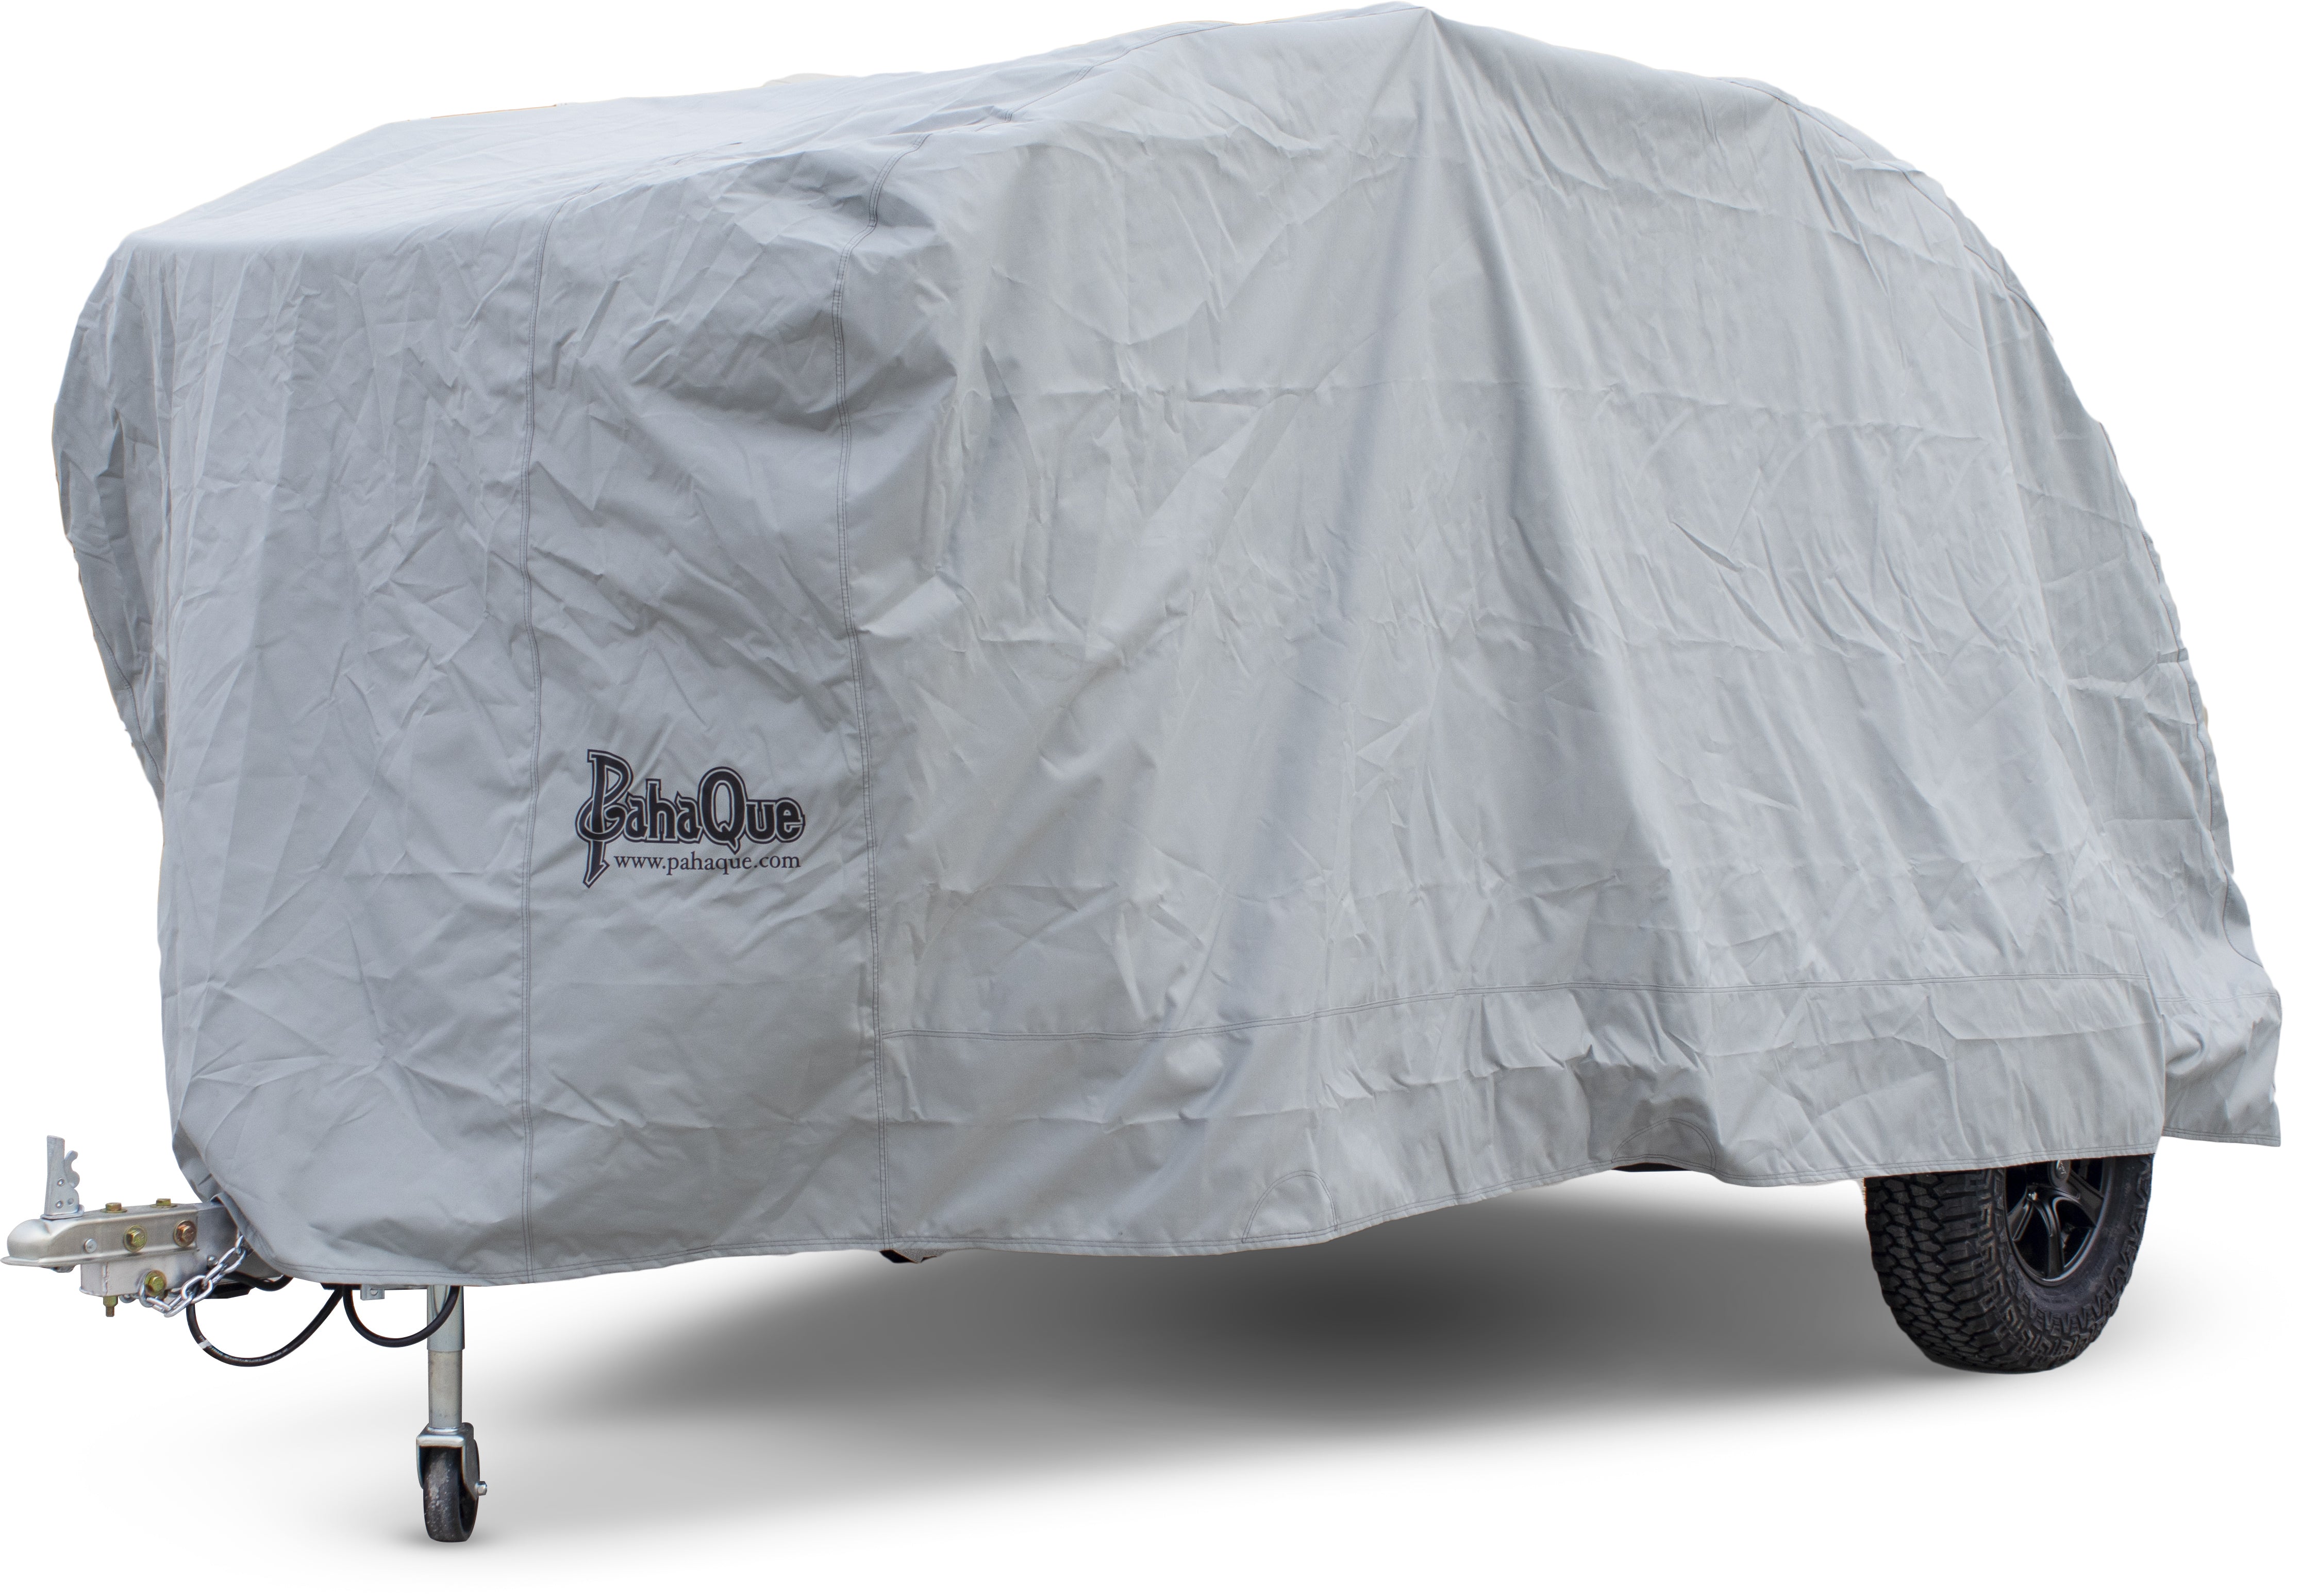 In-Tech Trailer Covers - PahaQue Wilderness